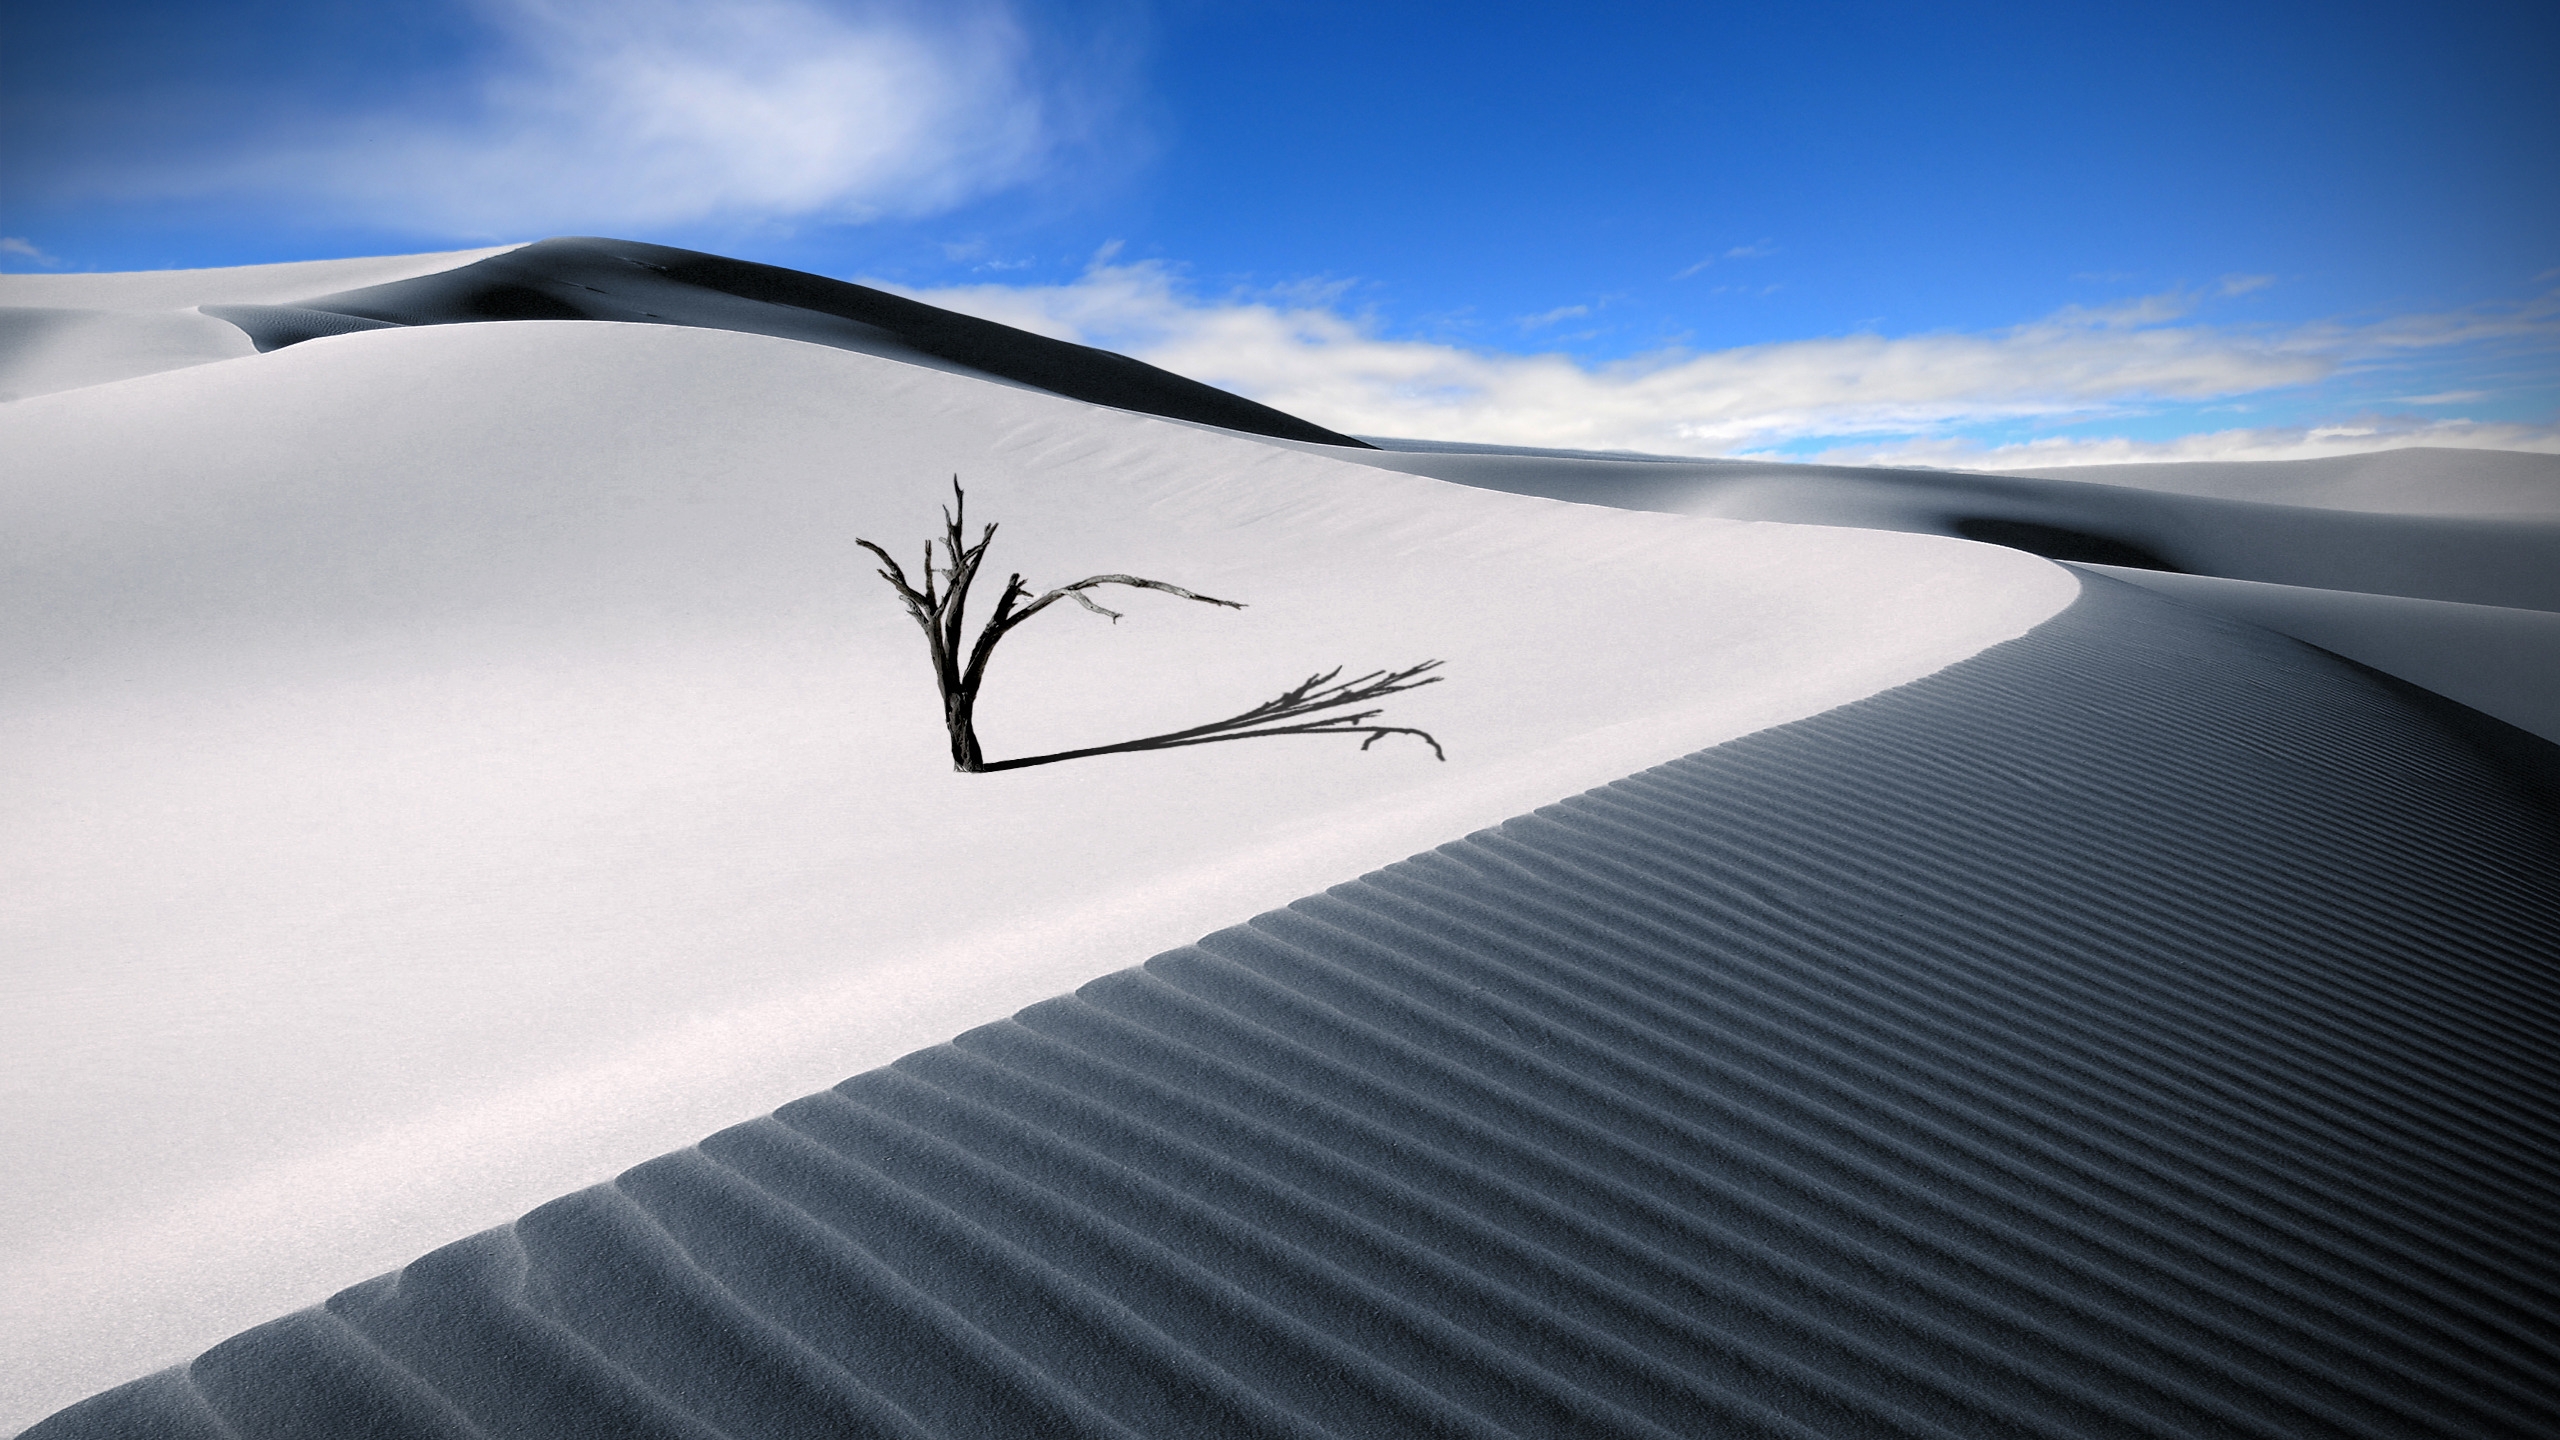 The Lonesome Dune for 2560x1440 HDTV resolution